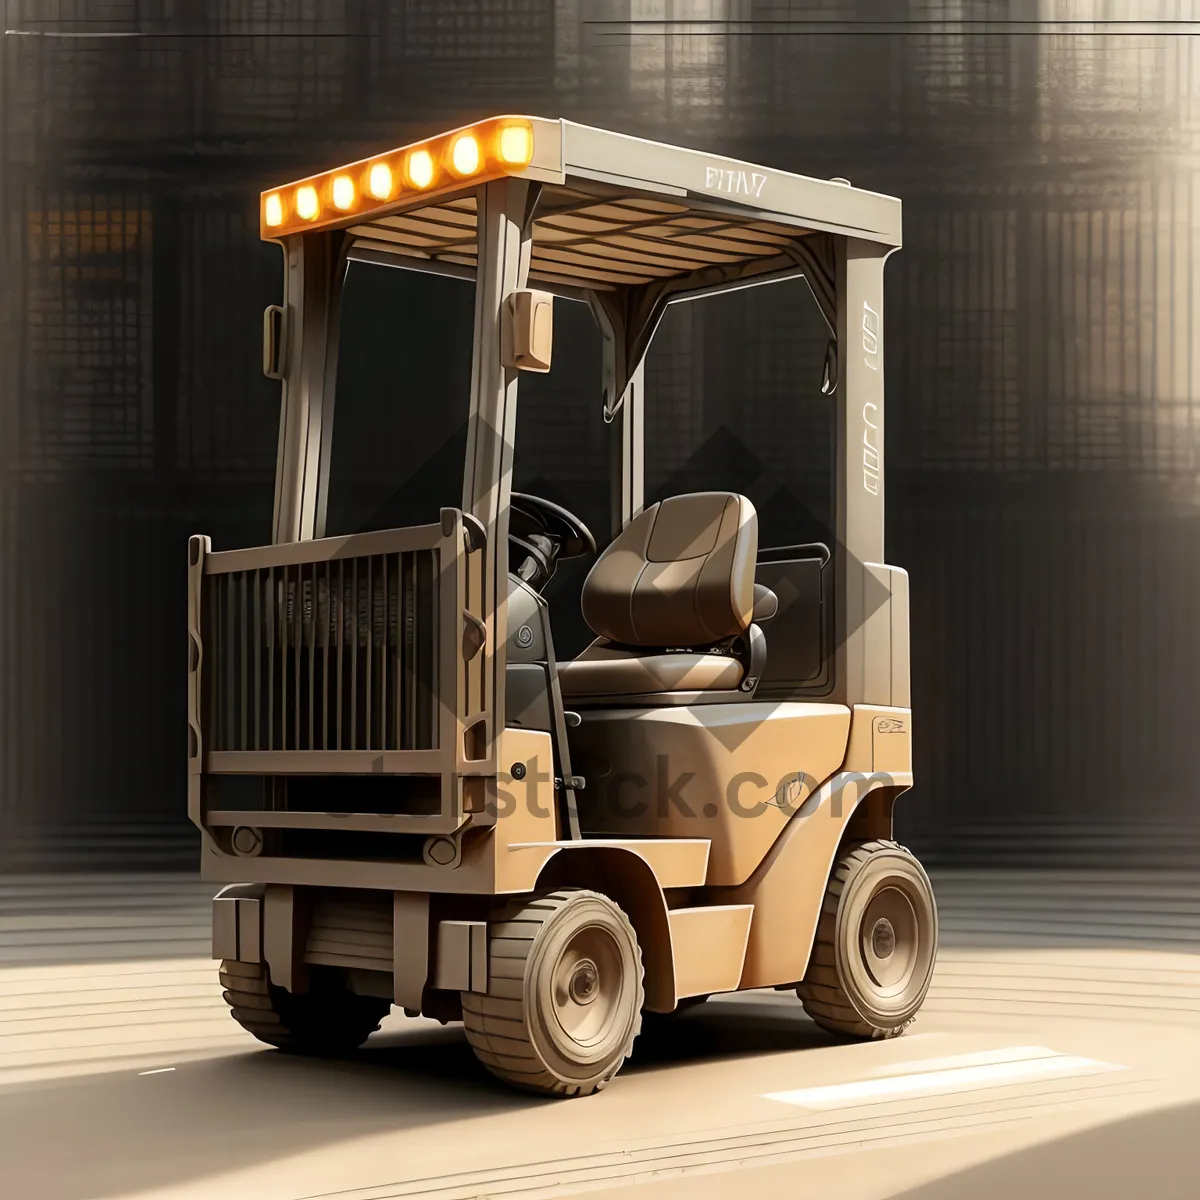 Picture of Heavy-duty Forklift Truck: Efficient Transportation for Industrial Cargo